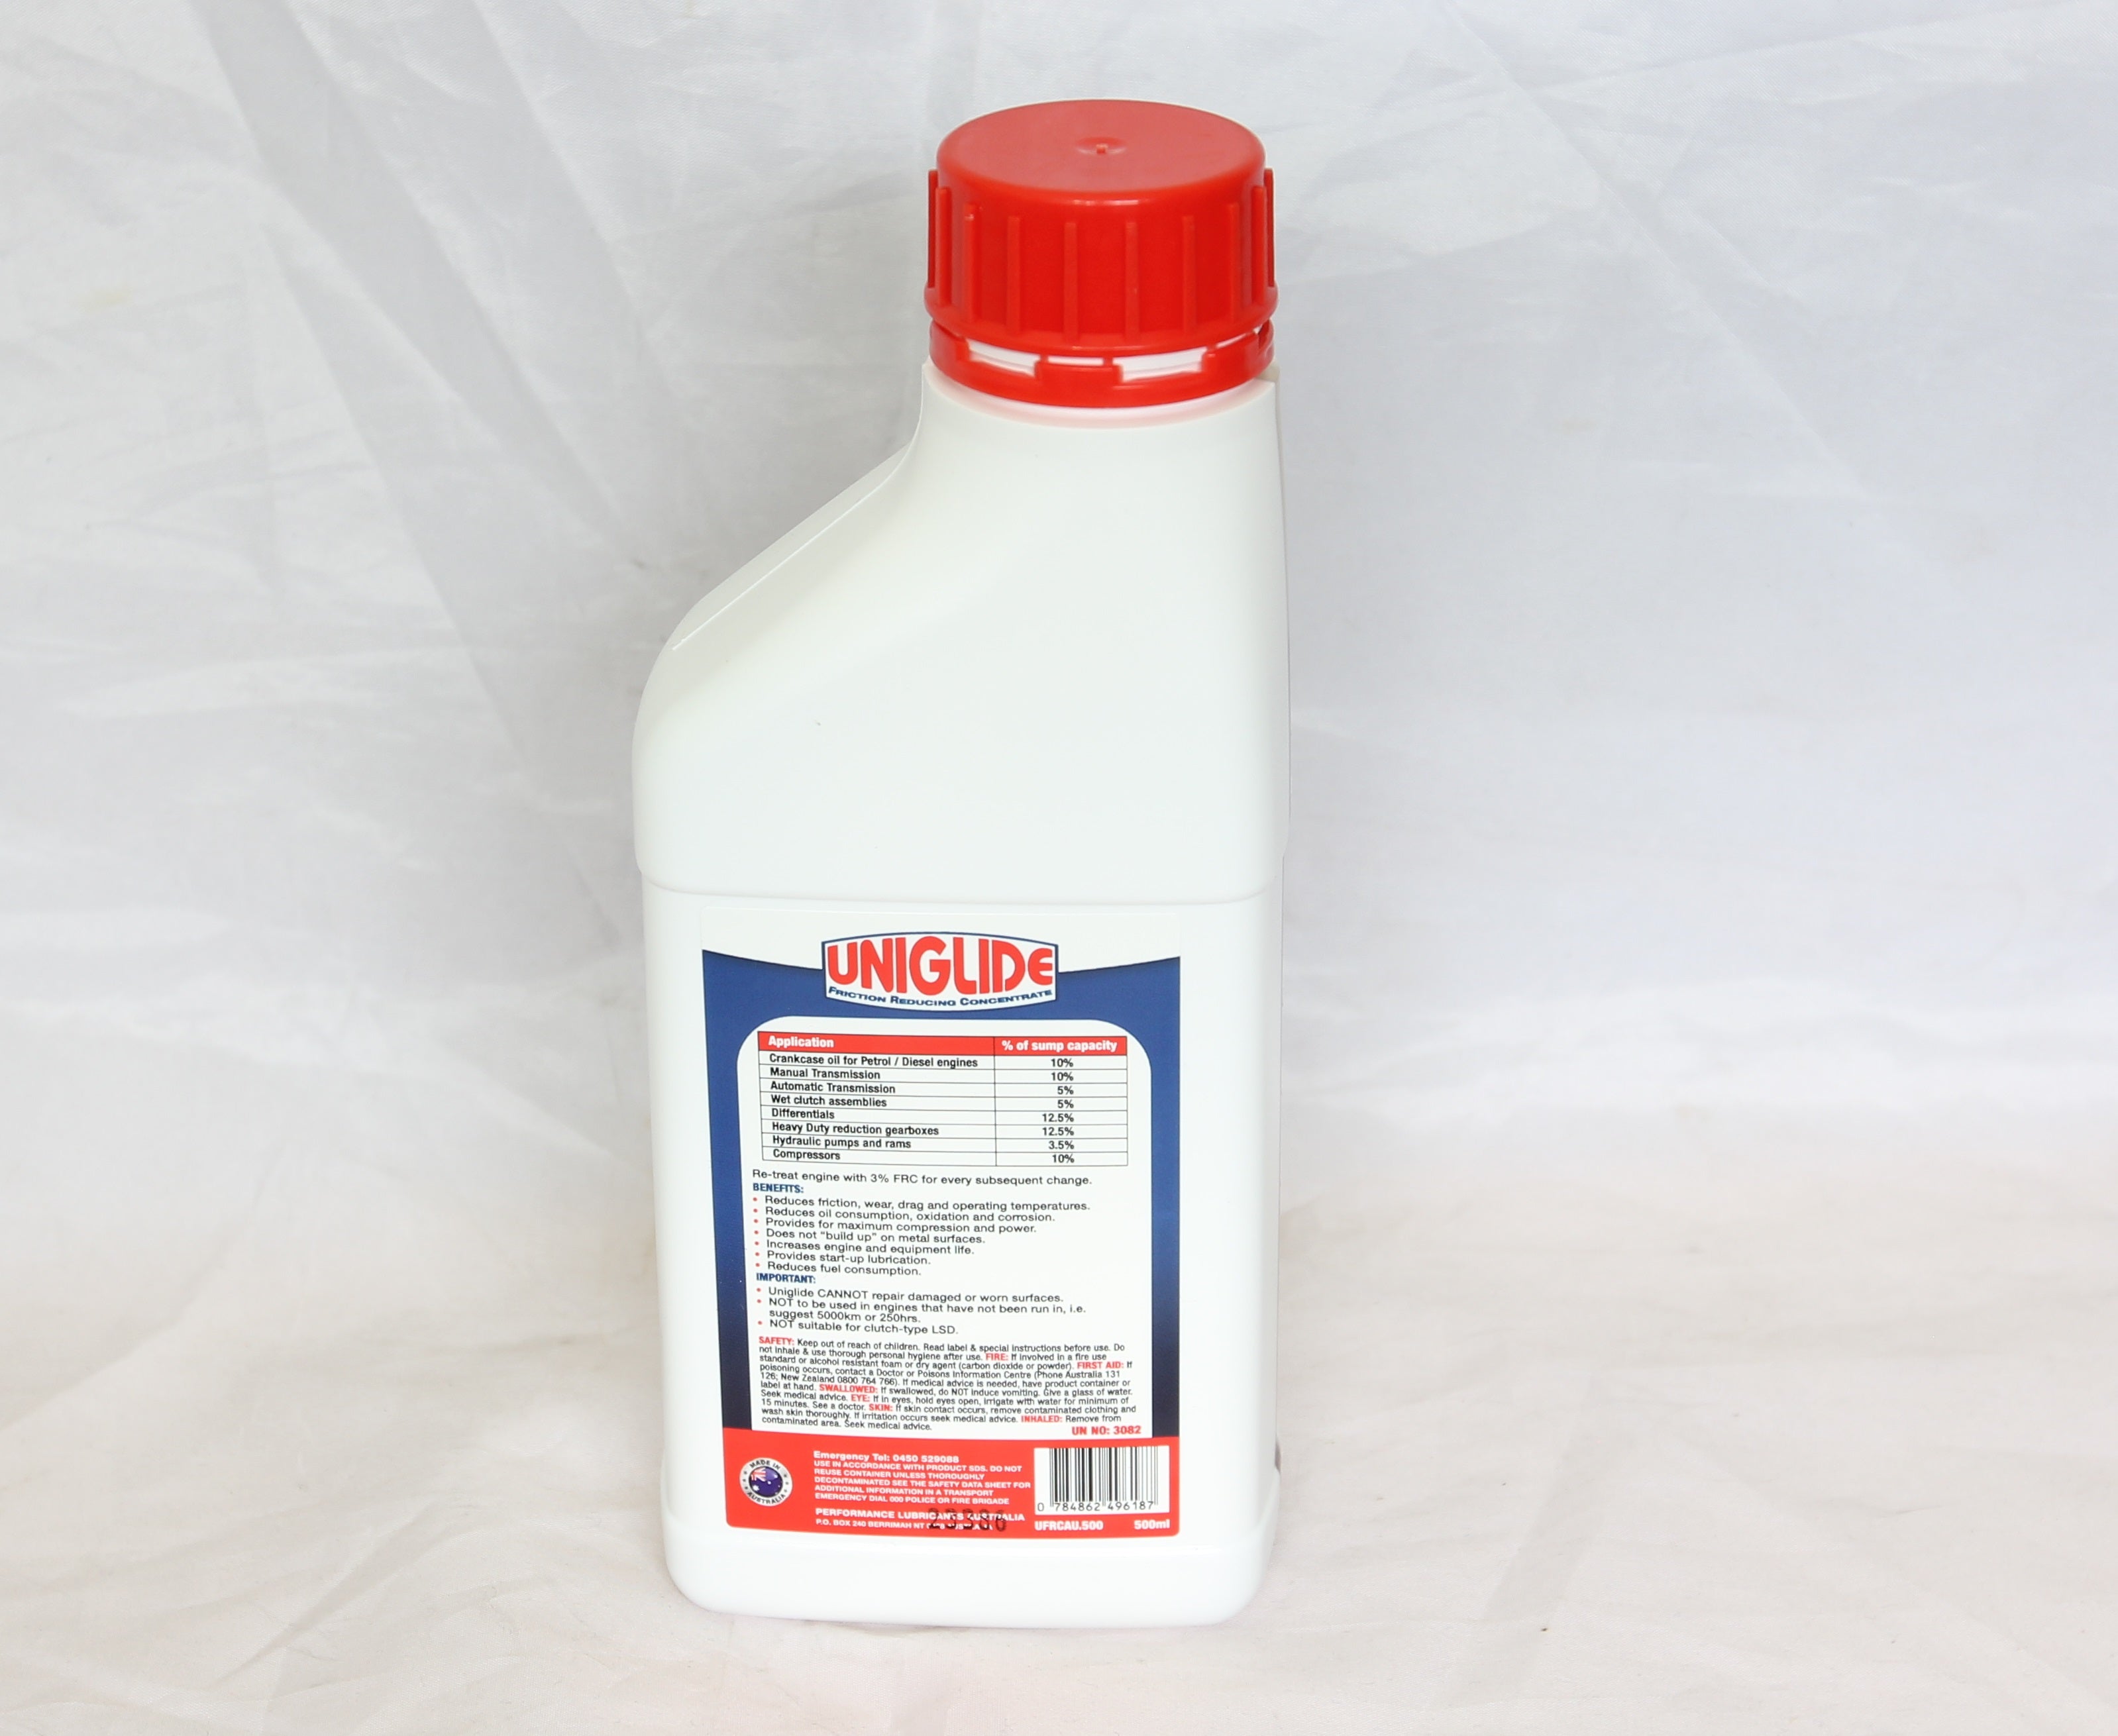 Uniglide Friction Reducing Concentrate - 1 Carton (12 x 500ml) | Performance Lubricants Australia